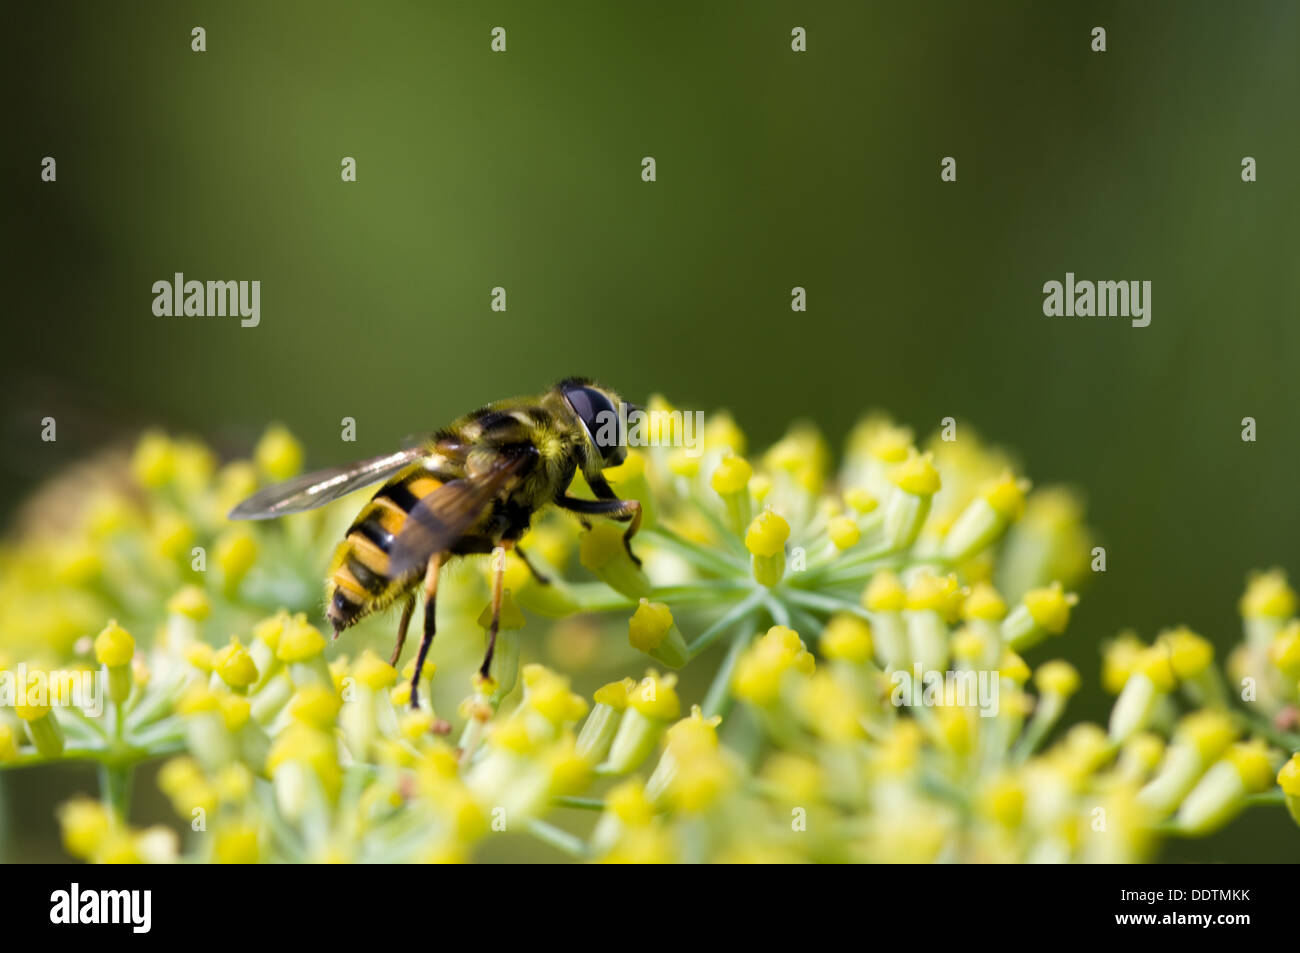 Hoverfly on yellow fennel flowers. Wasp mimic. Stock Photo